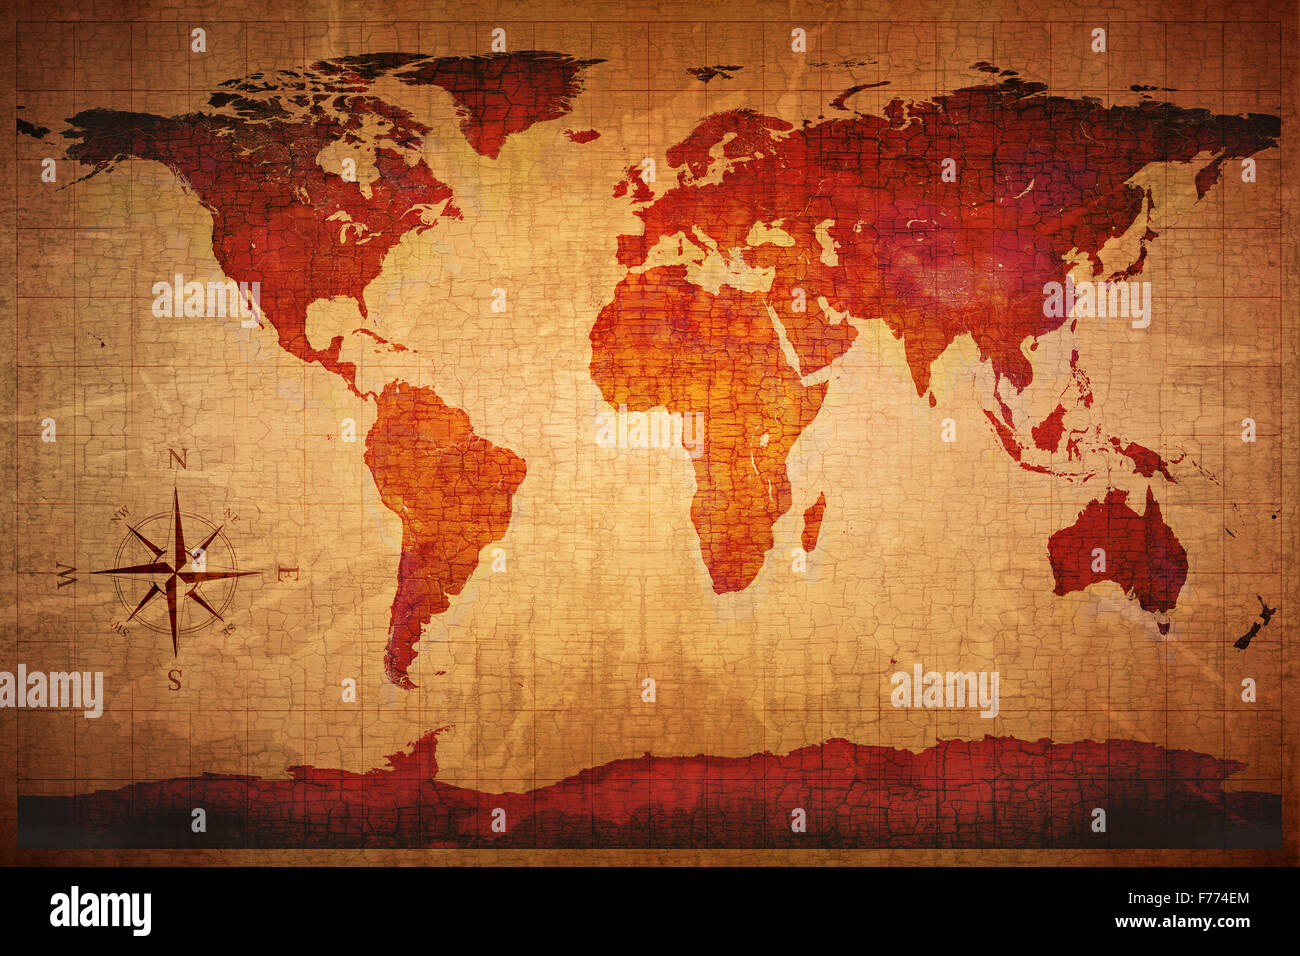 World Map on old grungy antique and yellow cracked paper background (Map derived from http://visibleearth.nasa.gov ) Stock Photo